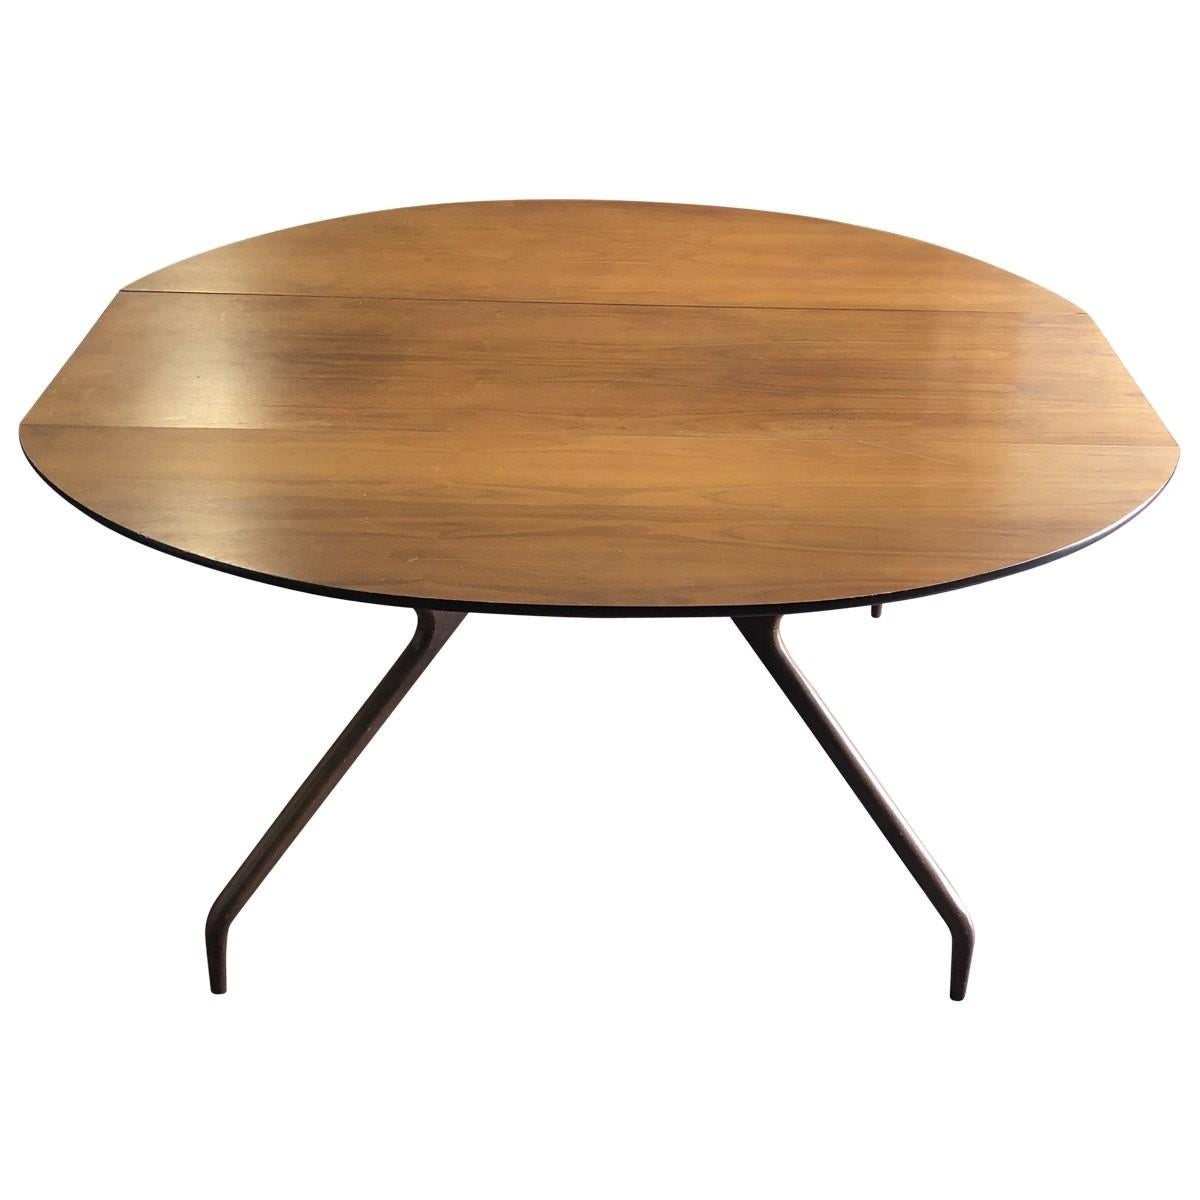 Sleek and shapely, this eye-catching drop-leaf dining table features sculptural spider-like legs that pullout / pull-out to support extended leaves. Designed by Greta Grossman for Glenn of California, this gorgeous drop-leaf dining table brings